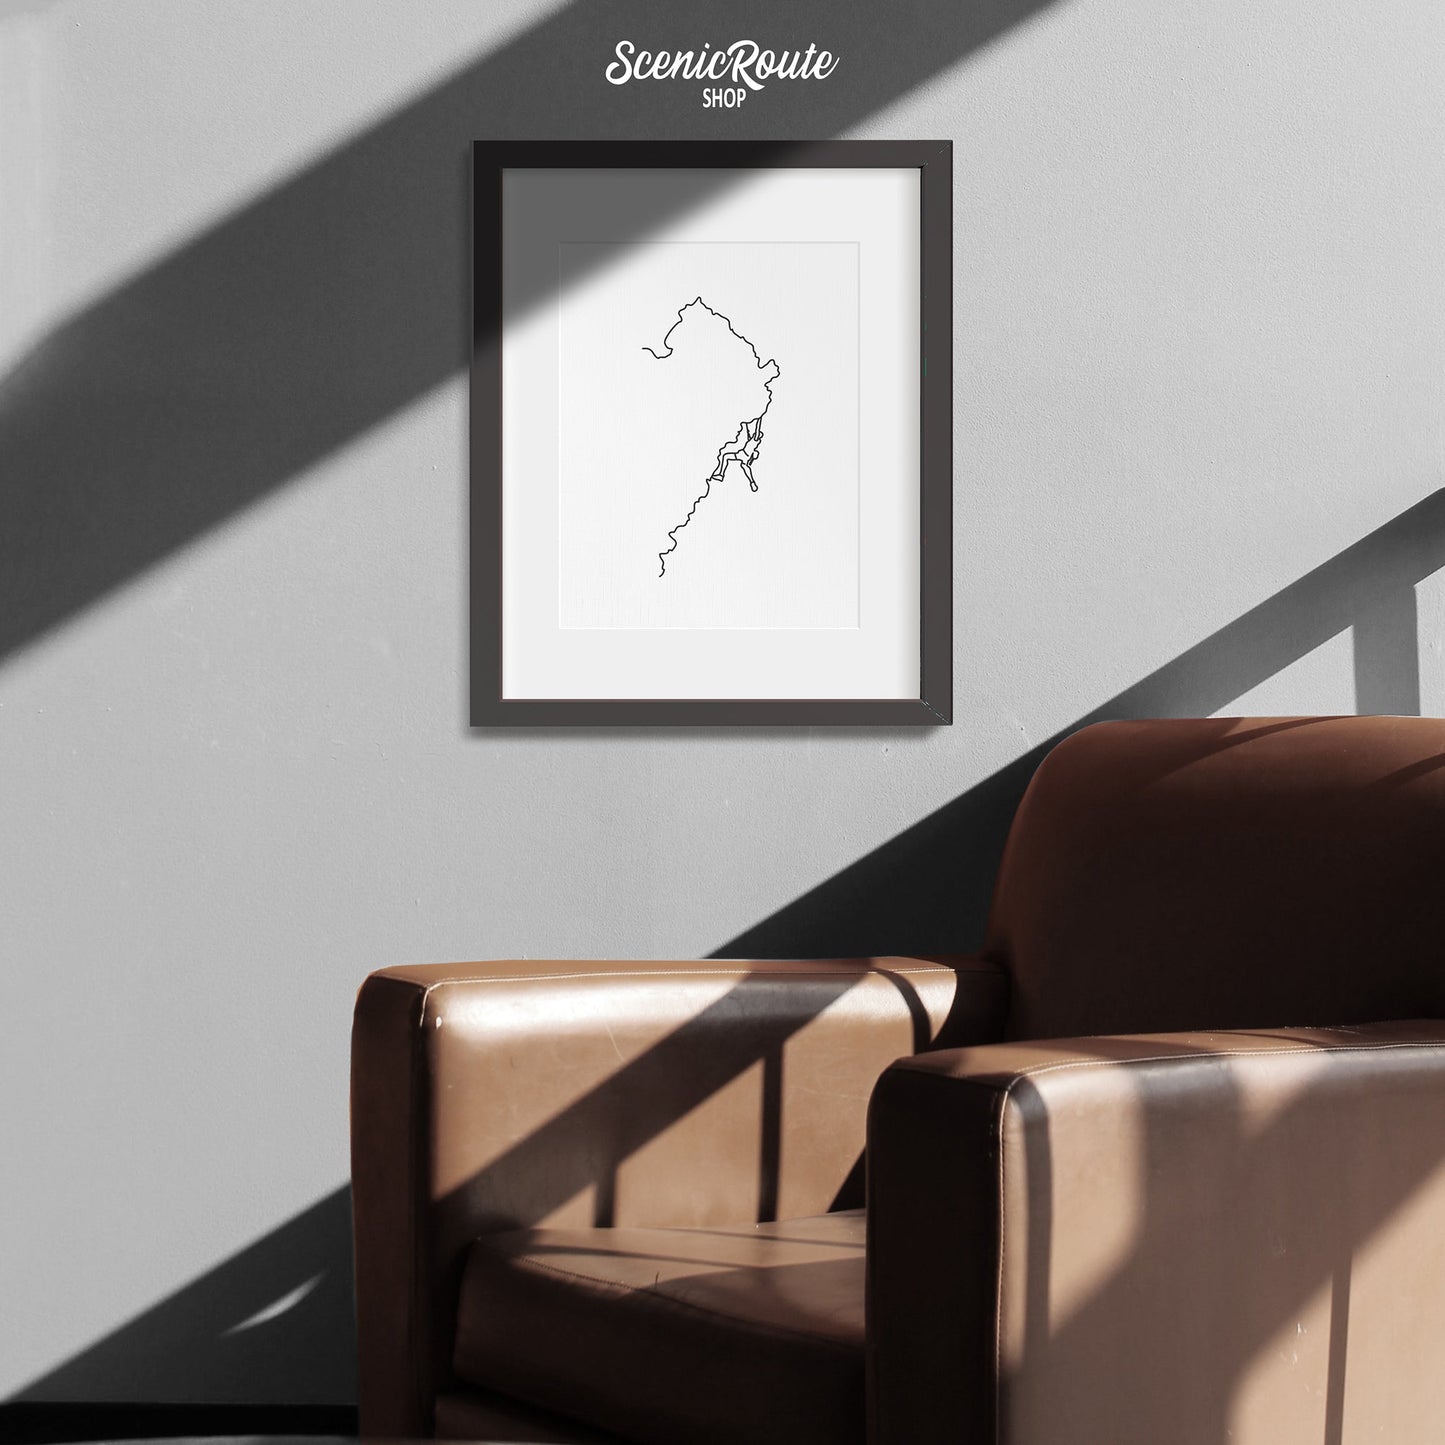 A framed line art drawing of Rock Climbing above a leather chair